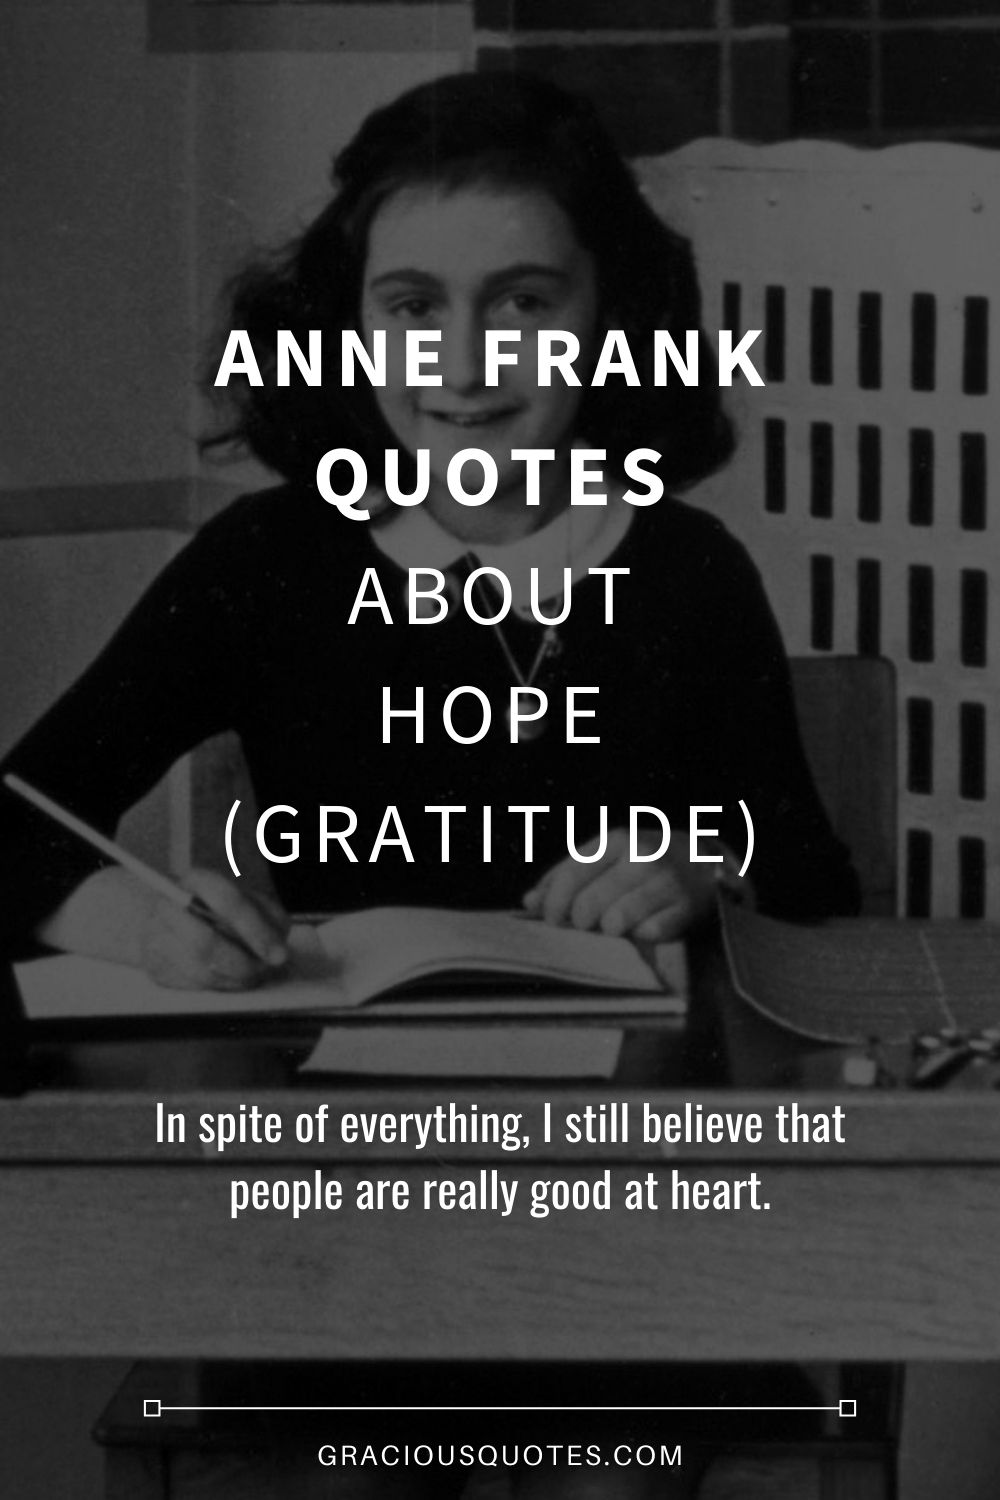 Anne Frank Quotes About Hope (GRATITUDE) - Gracious Quotes